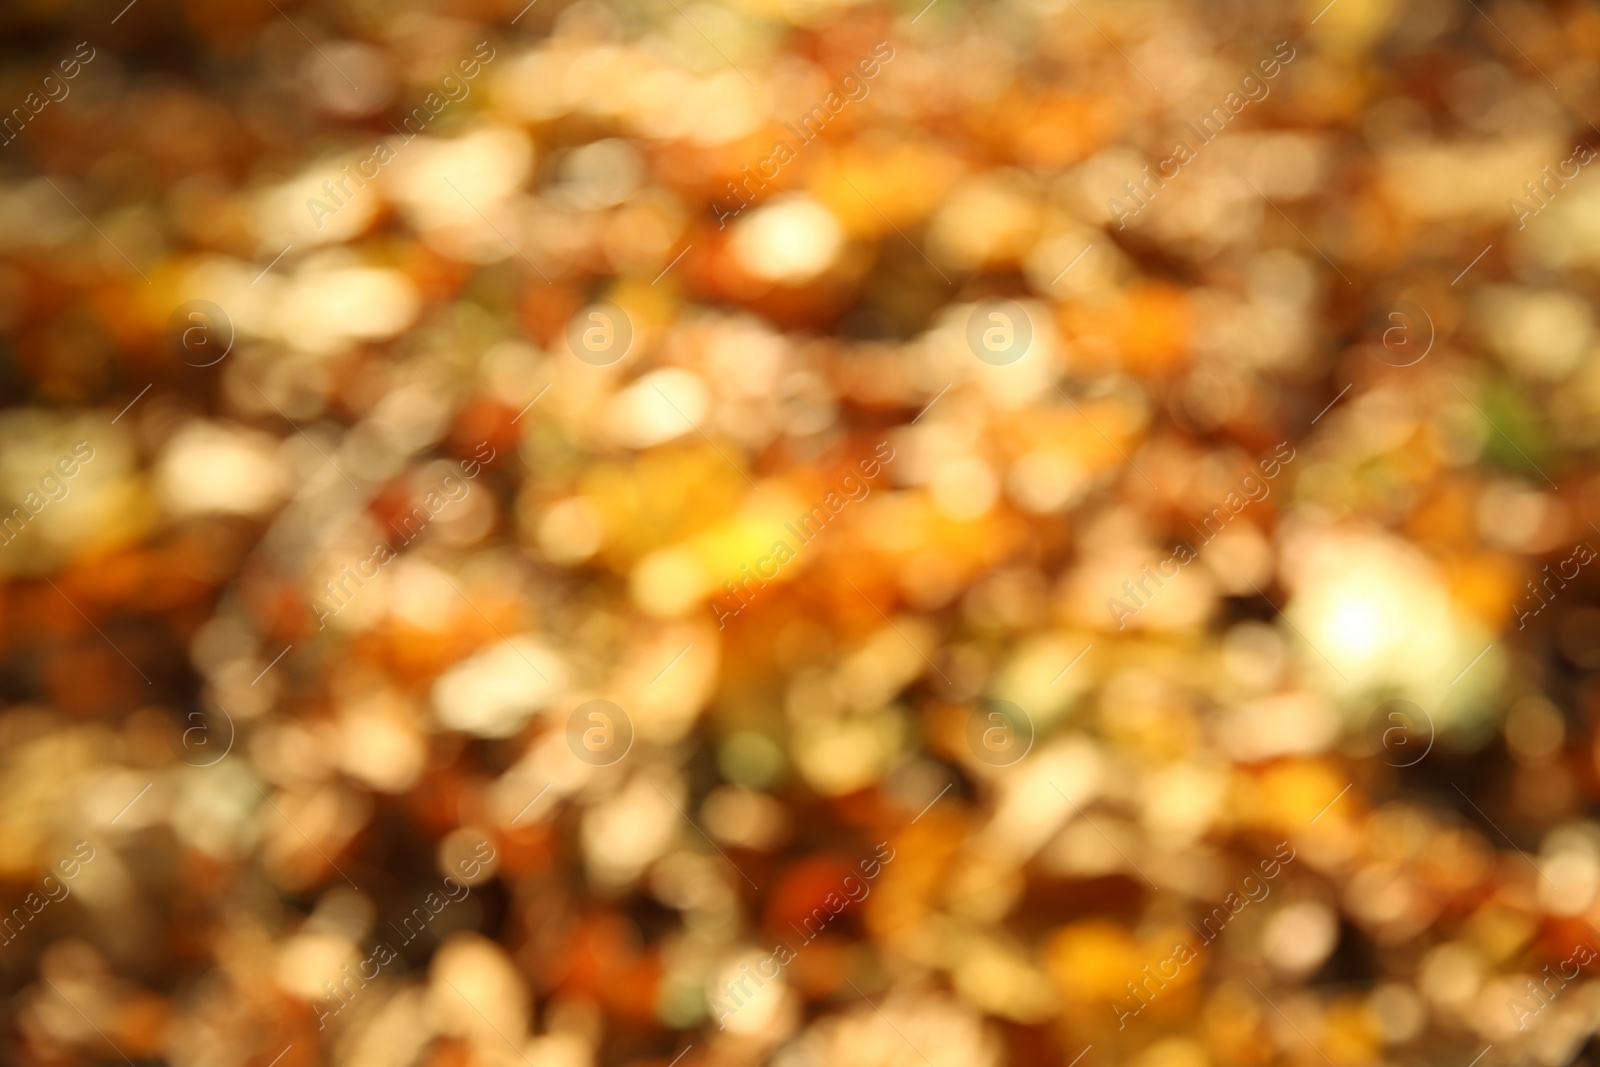 Photo of Autumn leaves on ground in park, blurred view